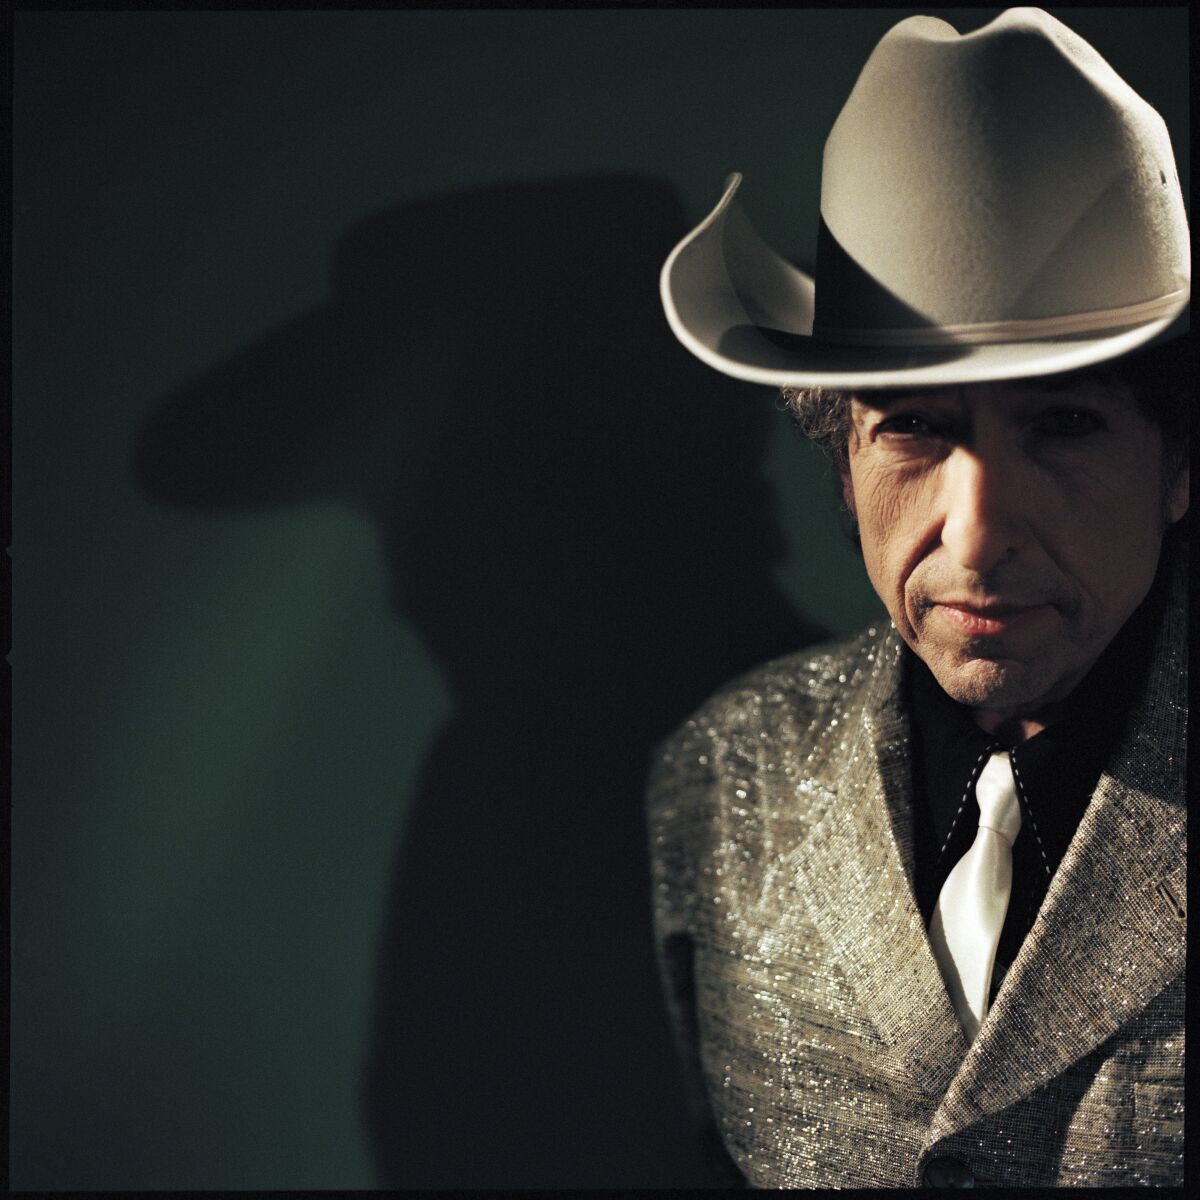 A man in a jacket, tie and cowboy hat.